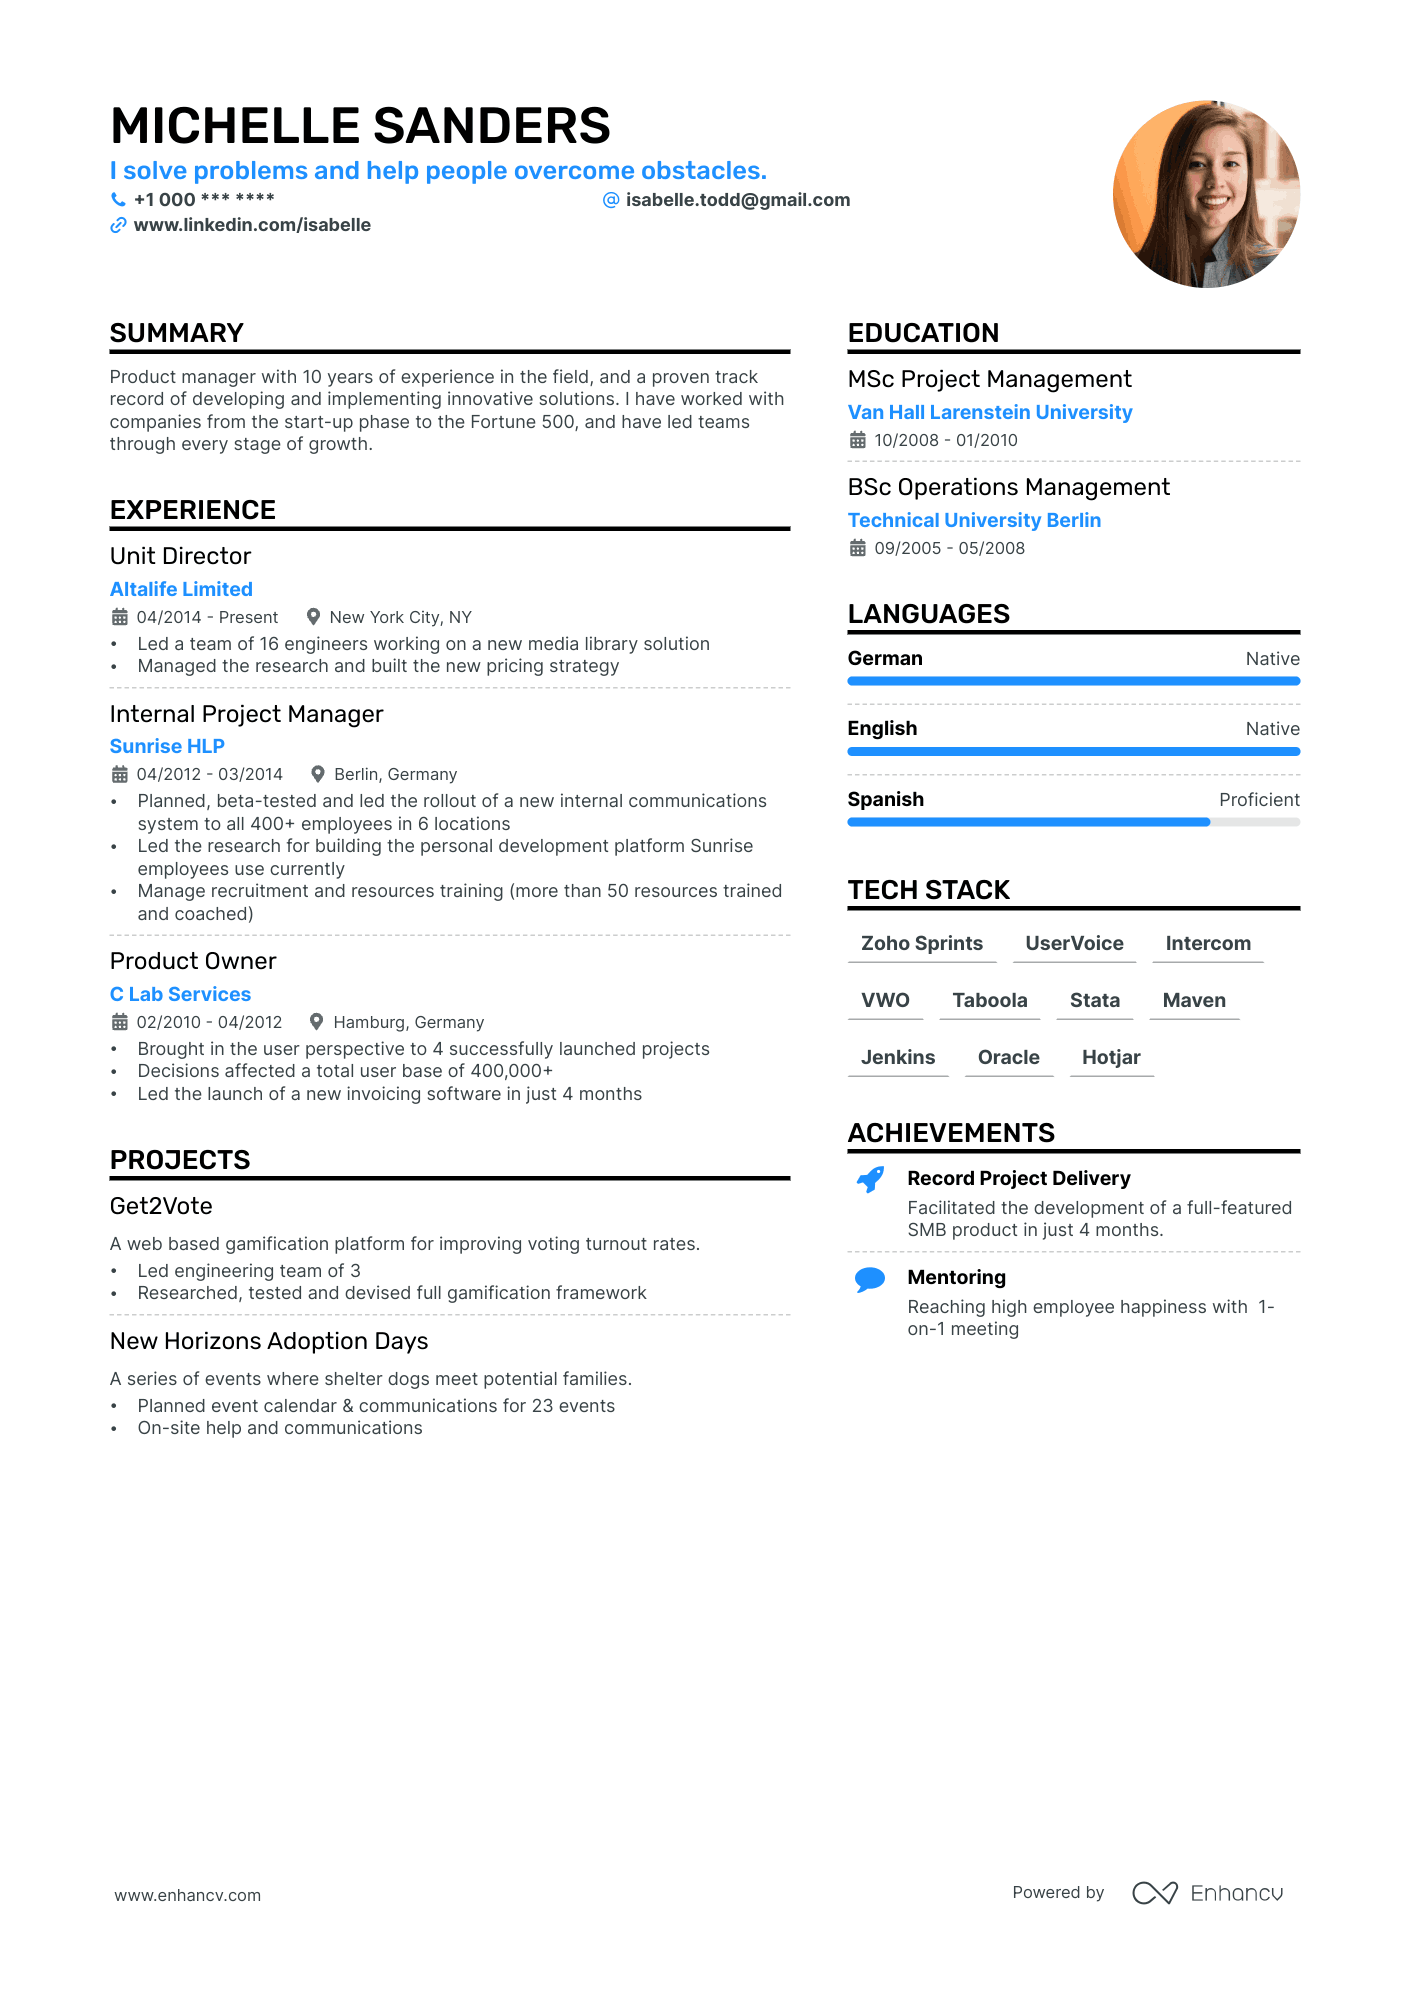 resume examples united states